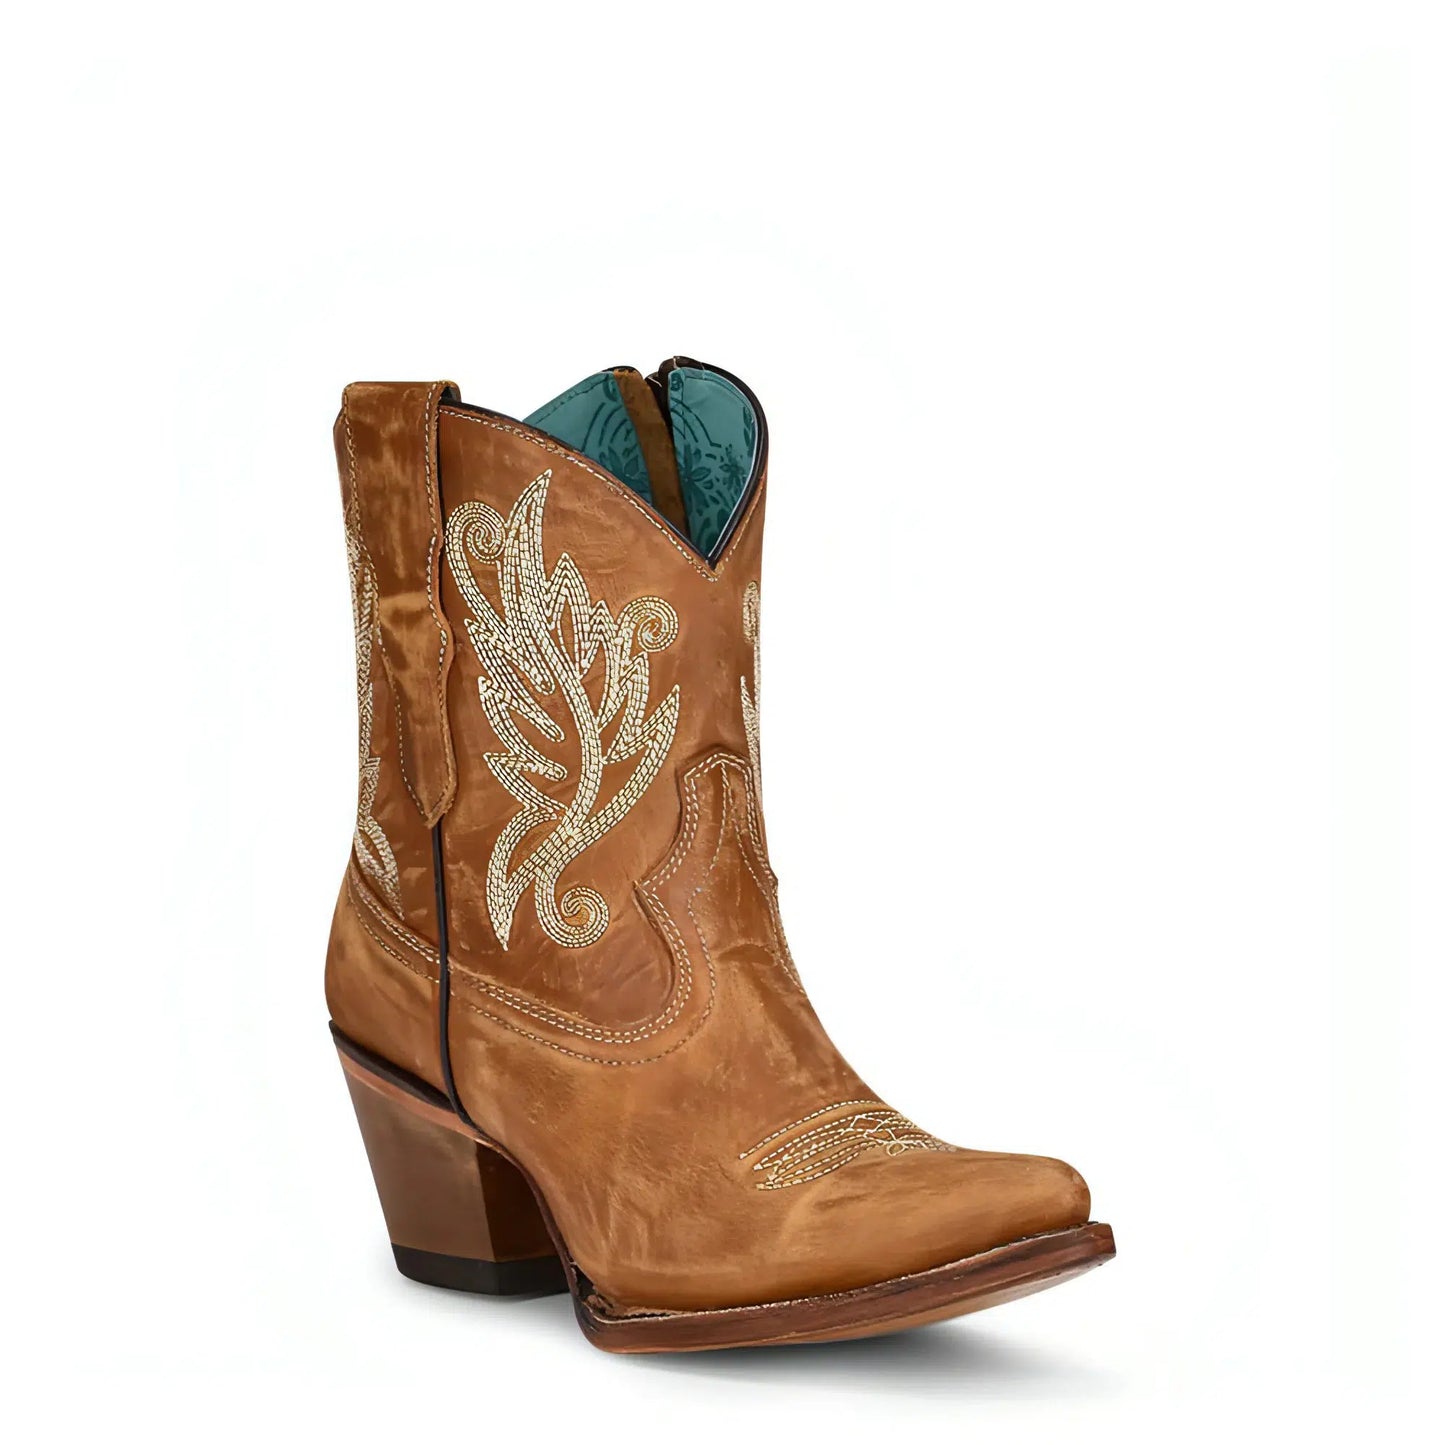 A4218 - M Corral brown western cowgirl cowhide leather ankle boots for women-Kuet.us